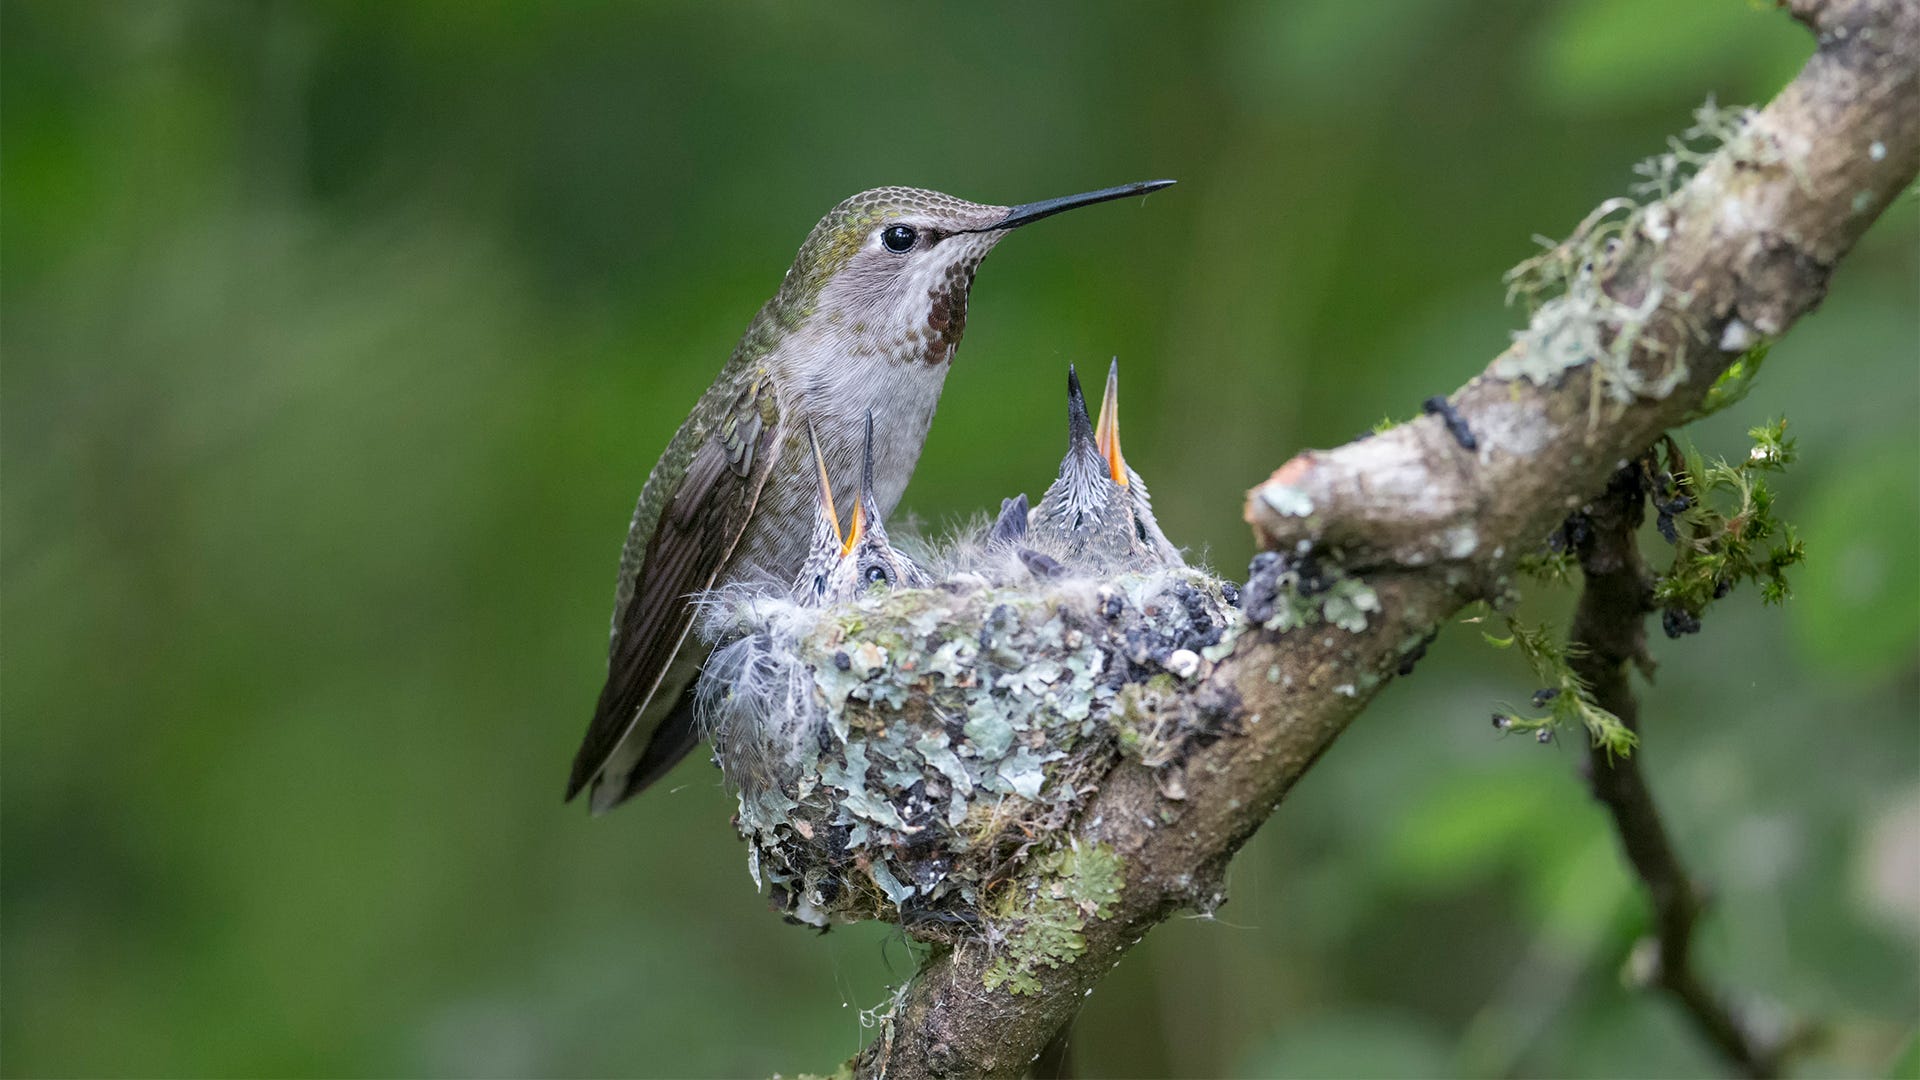 Frequently Asked Questions about Hummingbird Images